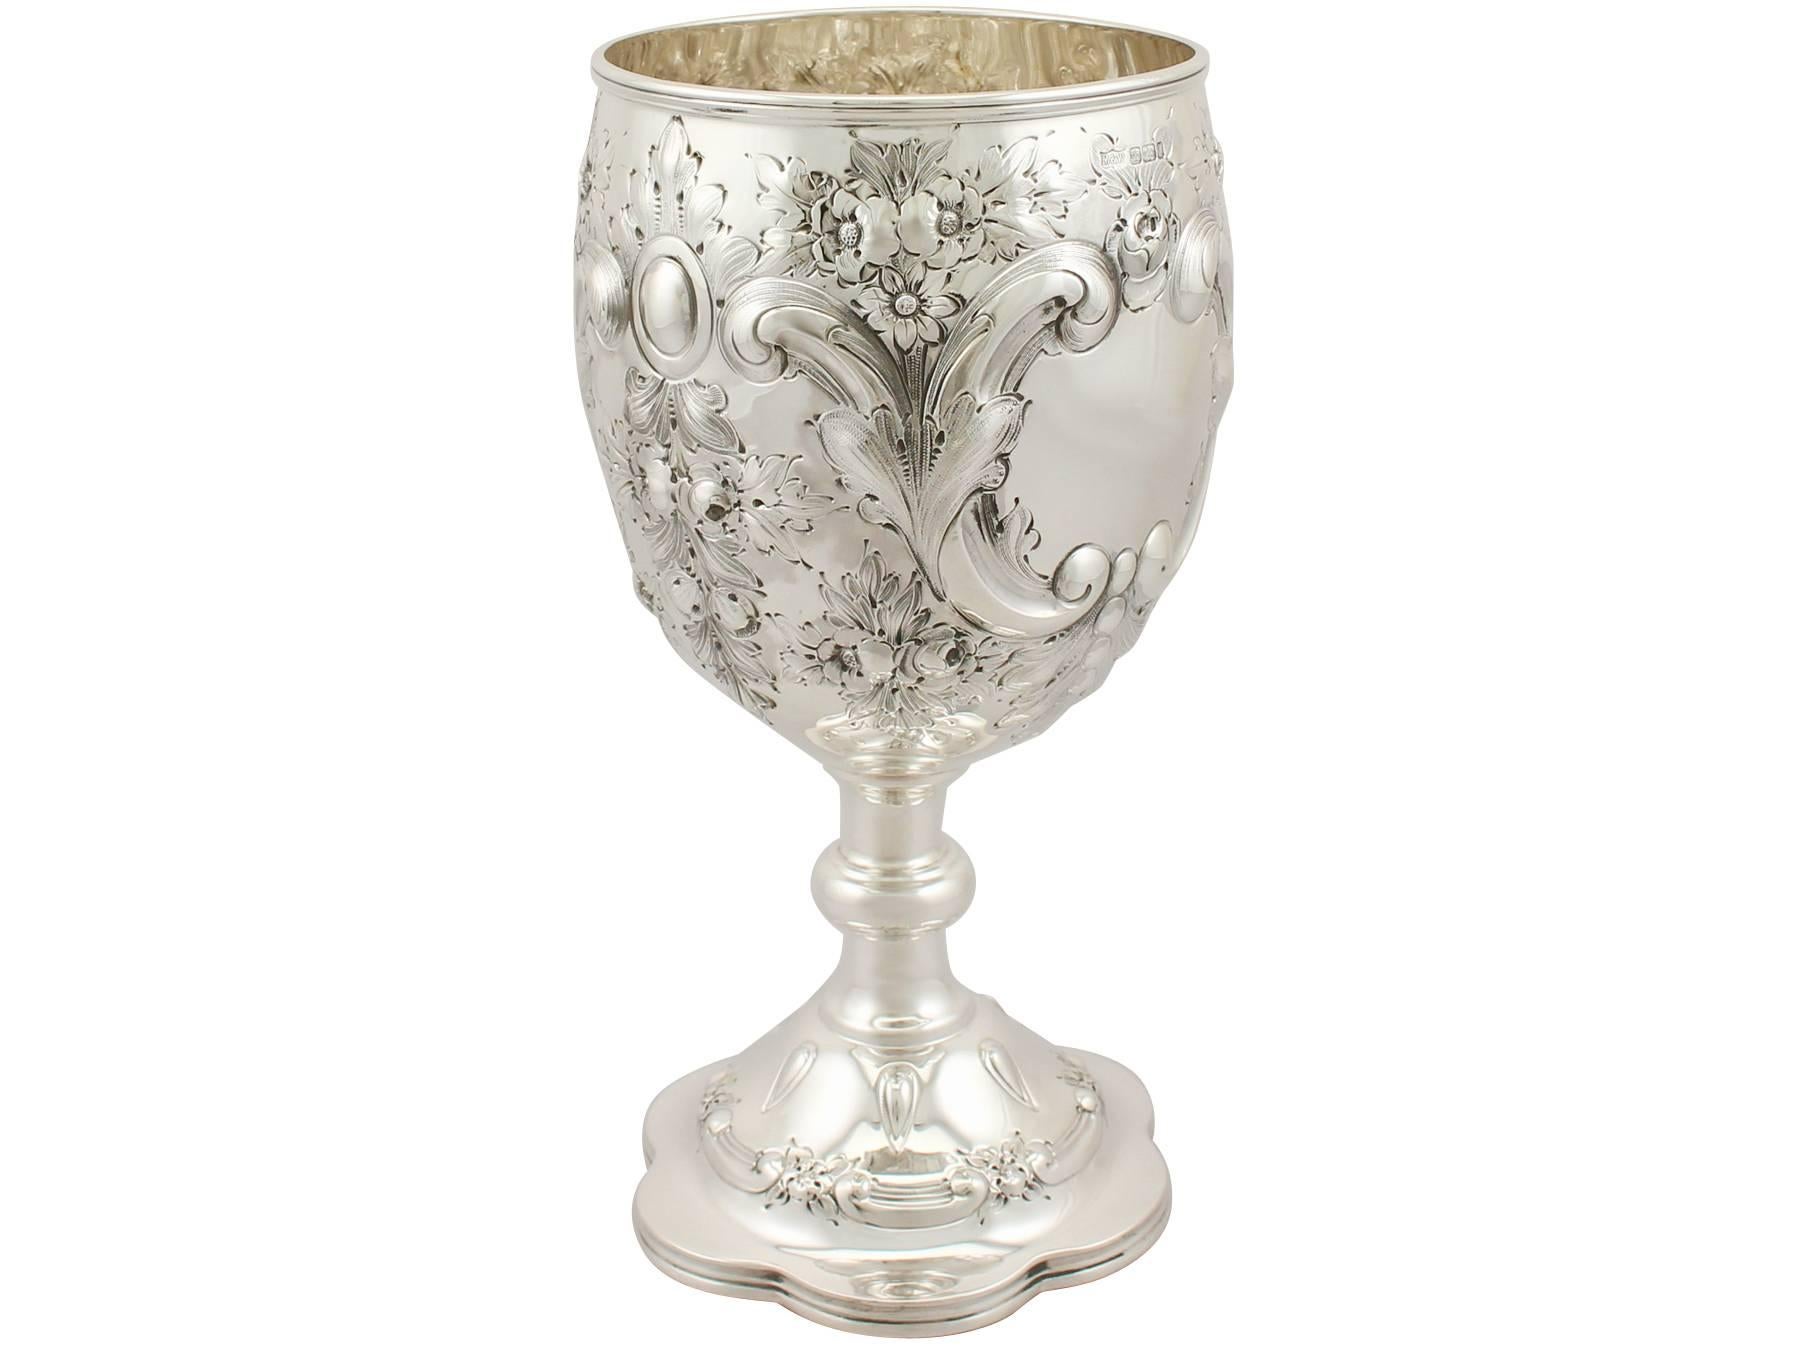 An exceptional, fine and impressive, large antique Edwardian English sterling silver presentation cup; an addition to our presentation silverware collection

This exceptional antique Edwardian sterling silver cup has a plain circular bell shaped